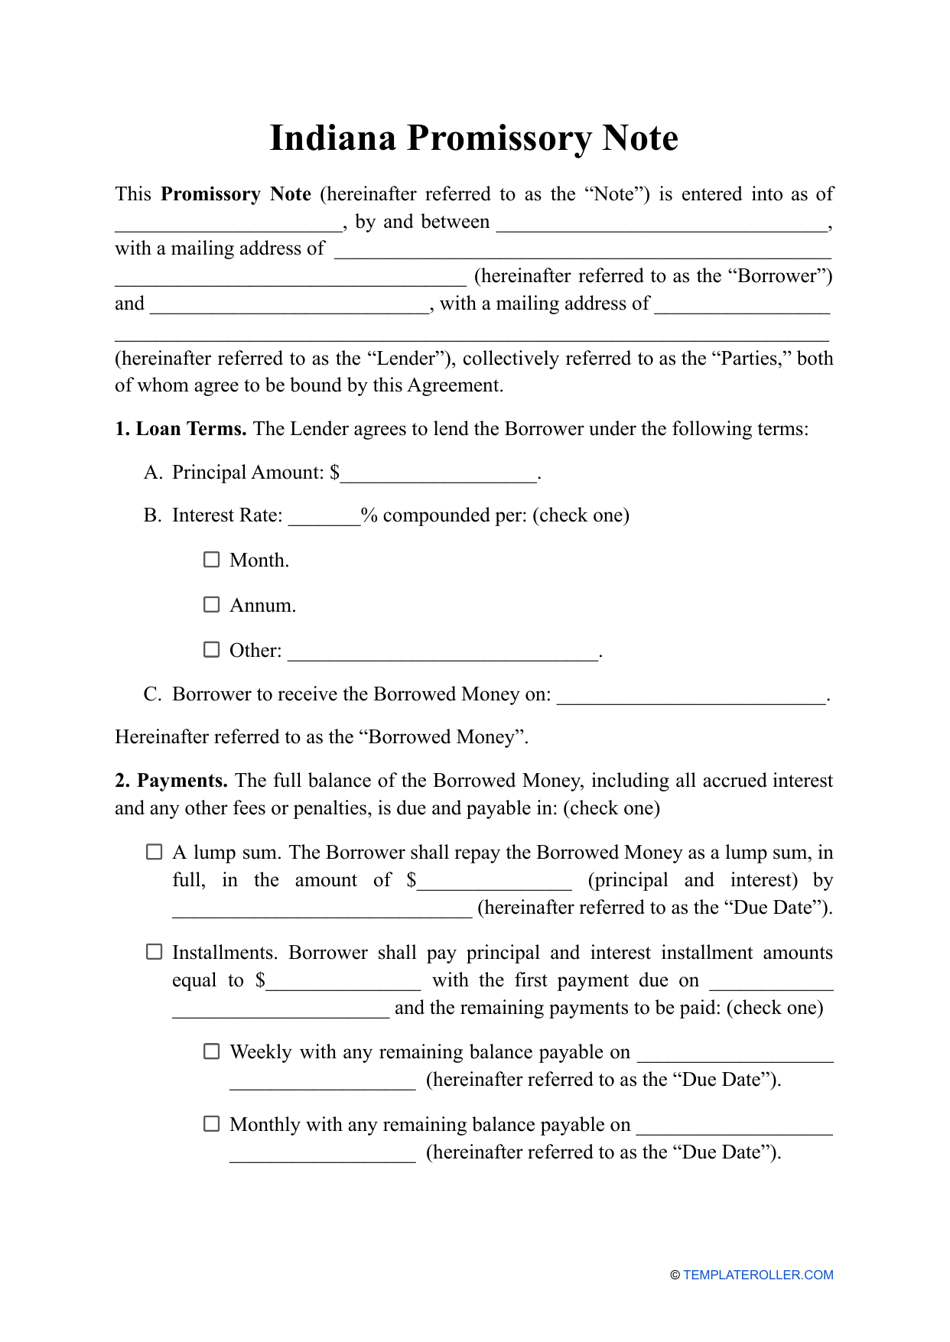 Indiana Promissory Note Template